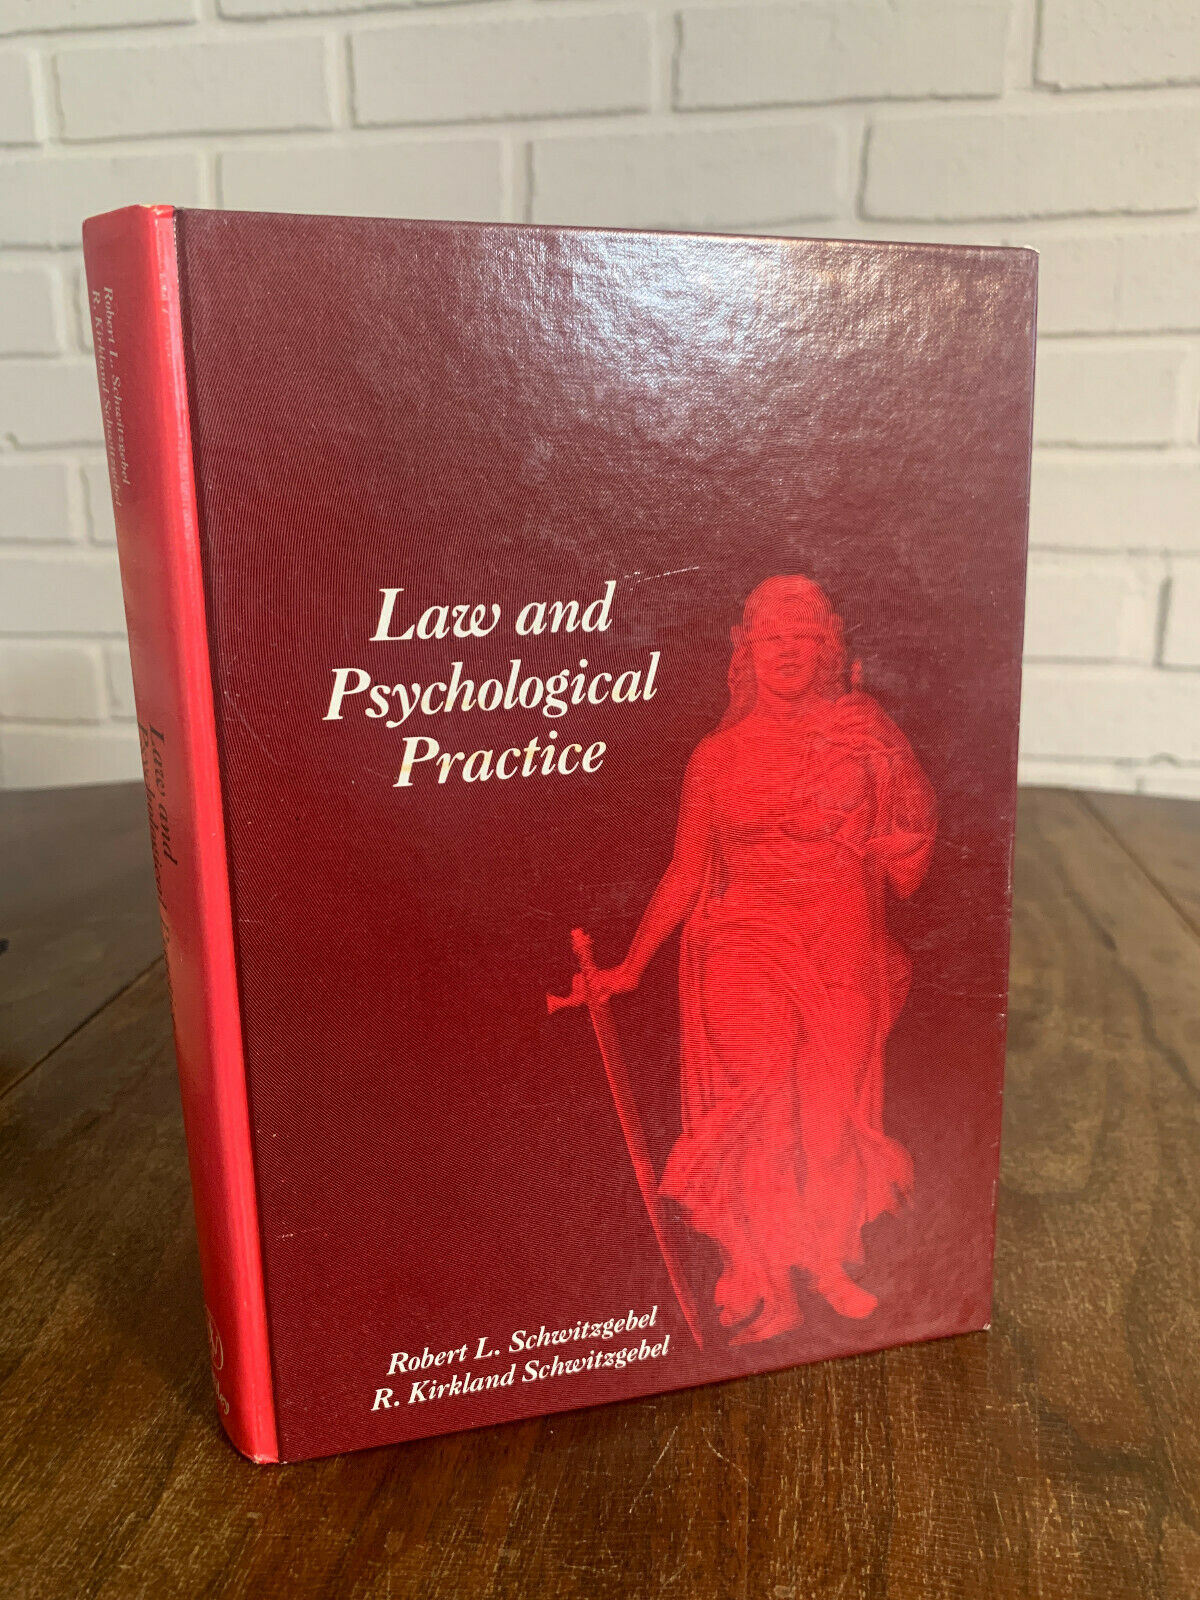 Law and Psychological Practice Paperback Robert L. Schwitzgebel (Z2)